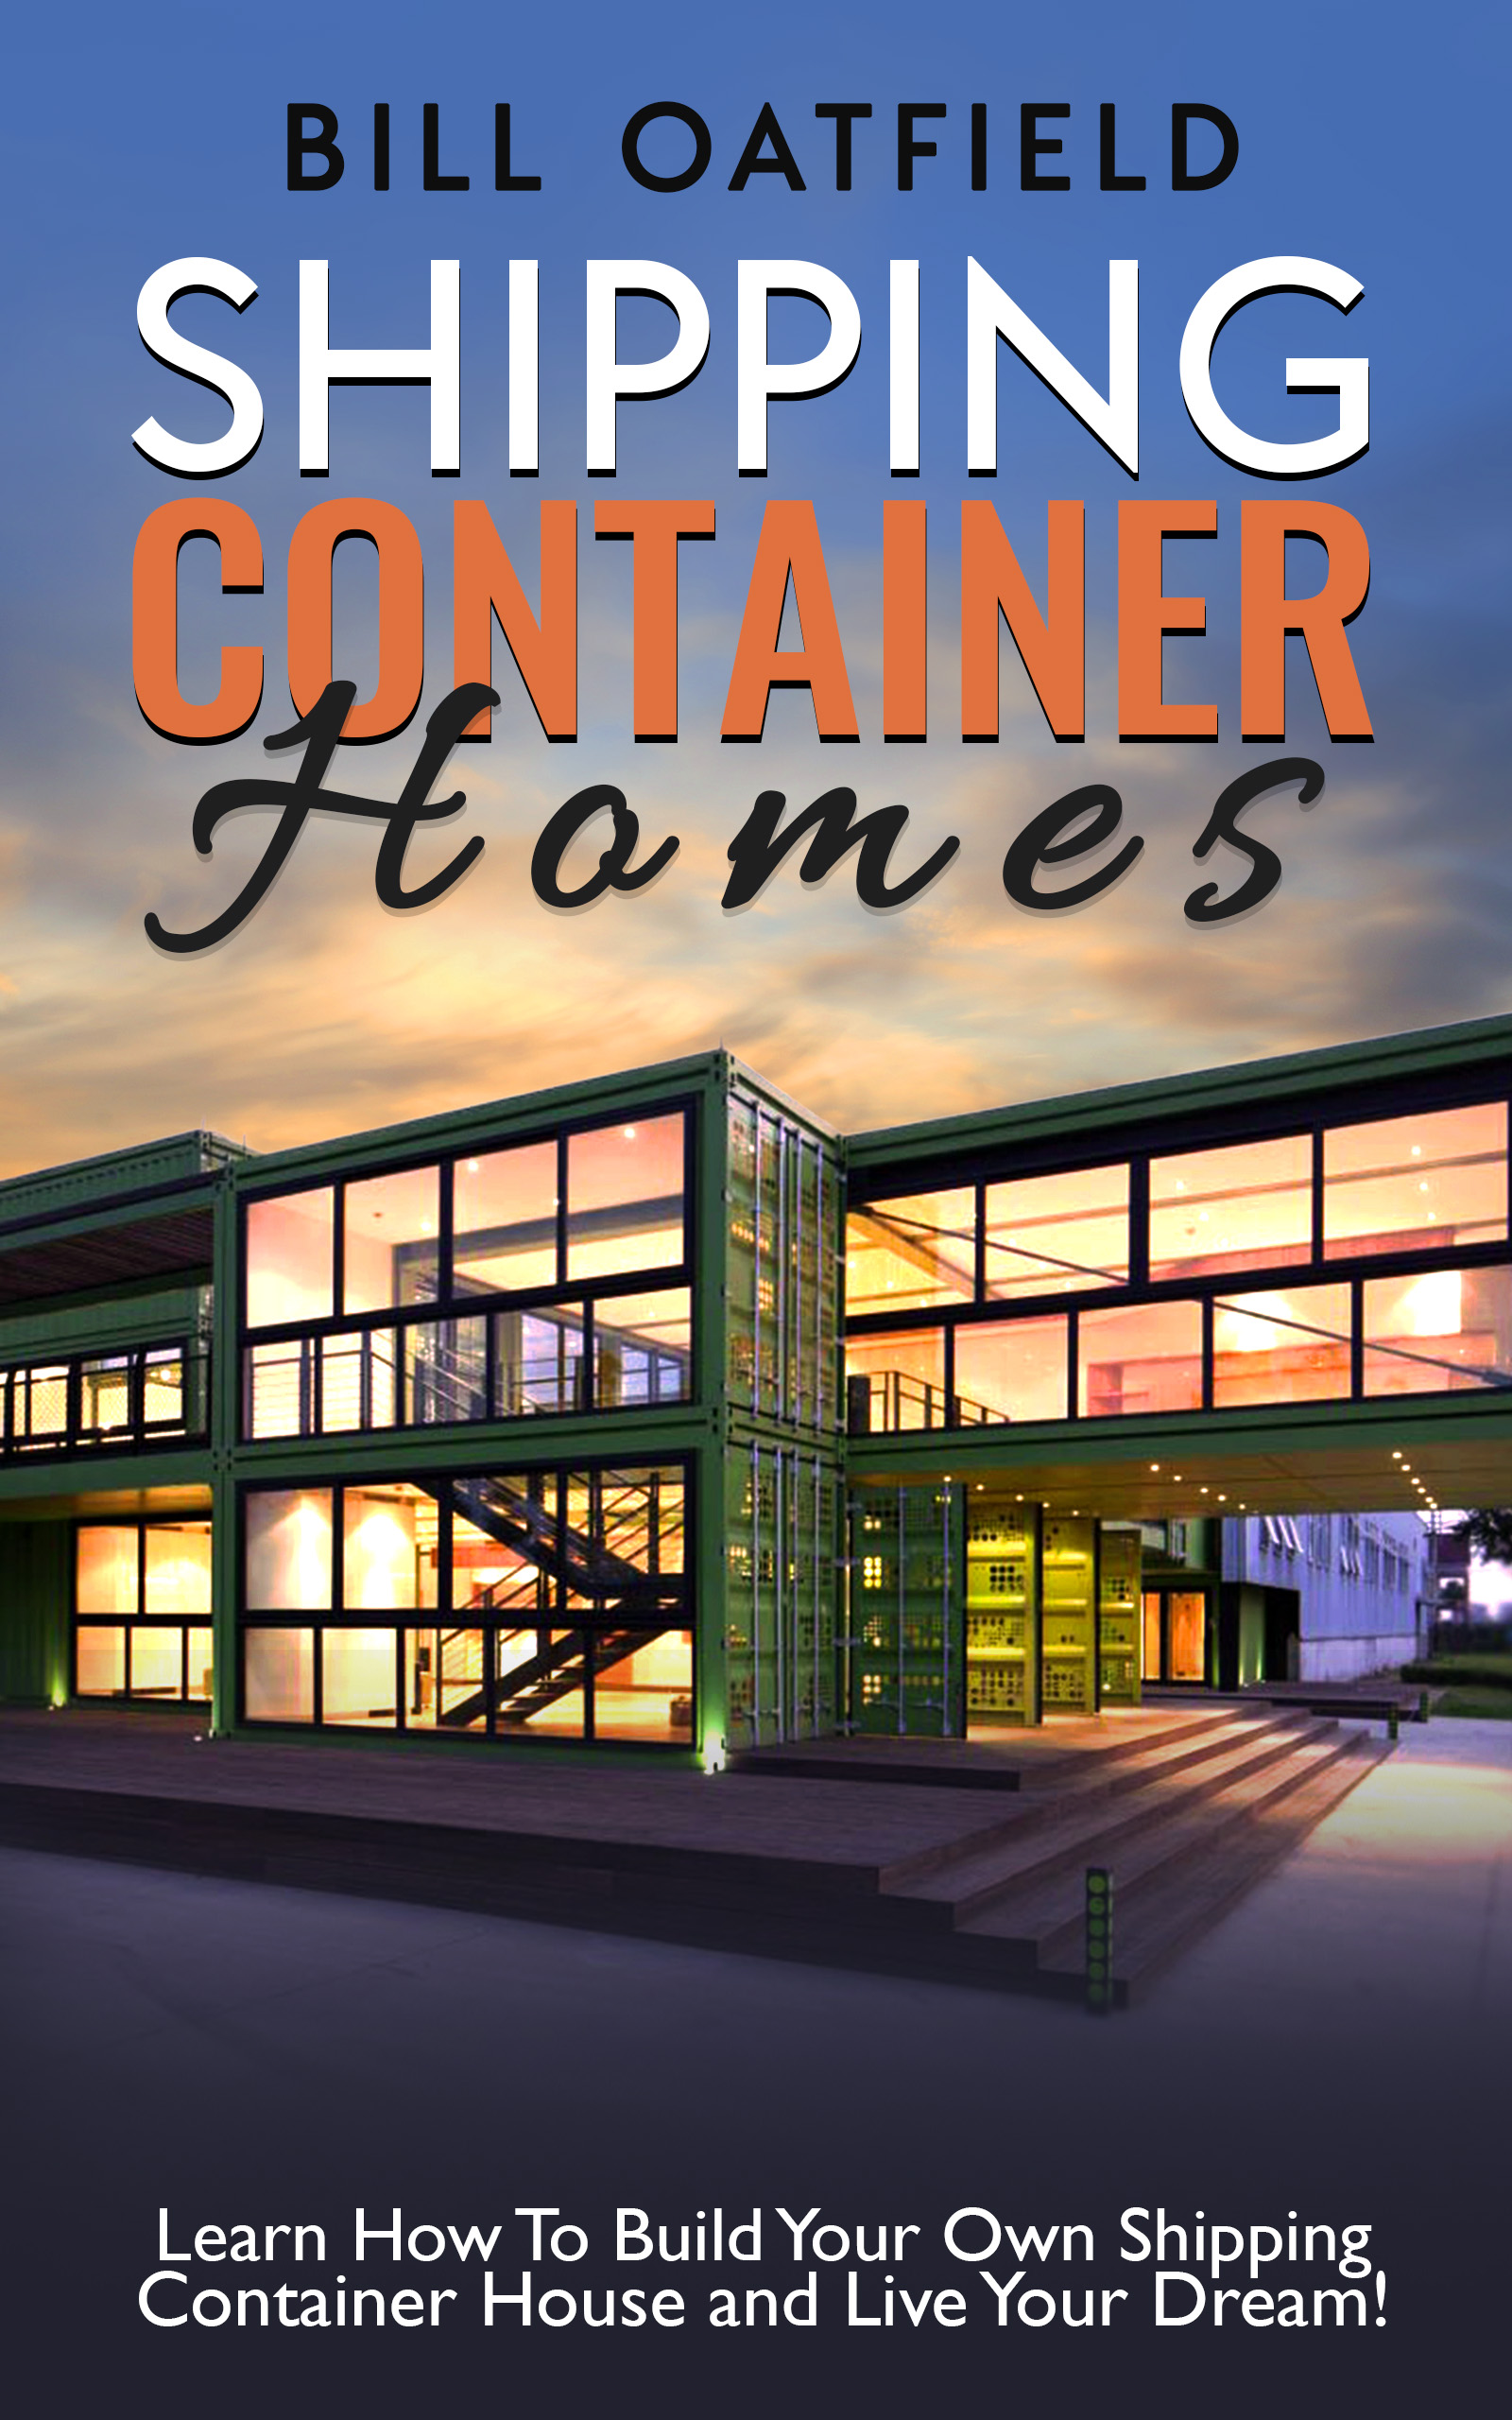 FREE: Shipping Container Homes: Learn How To Build Your Own Shipping Container House and Live Your Dream! by Bill Oatfield